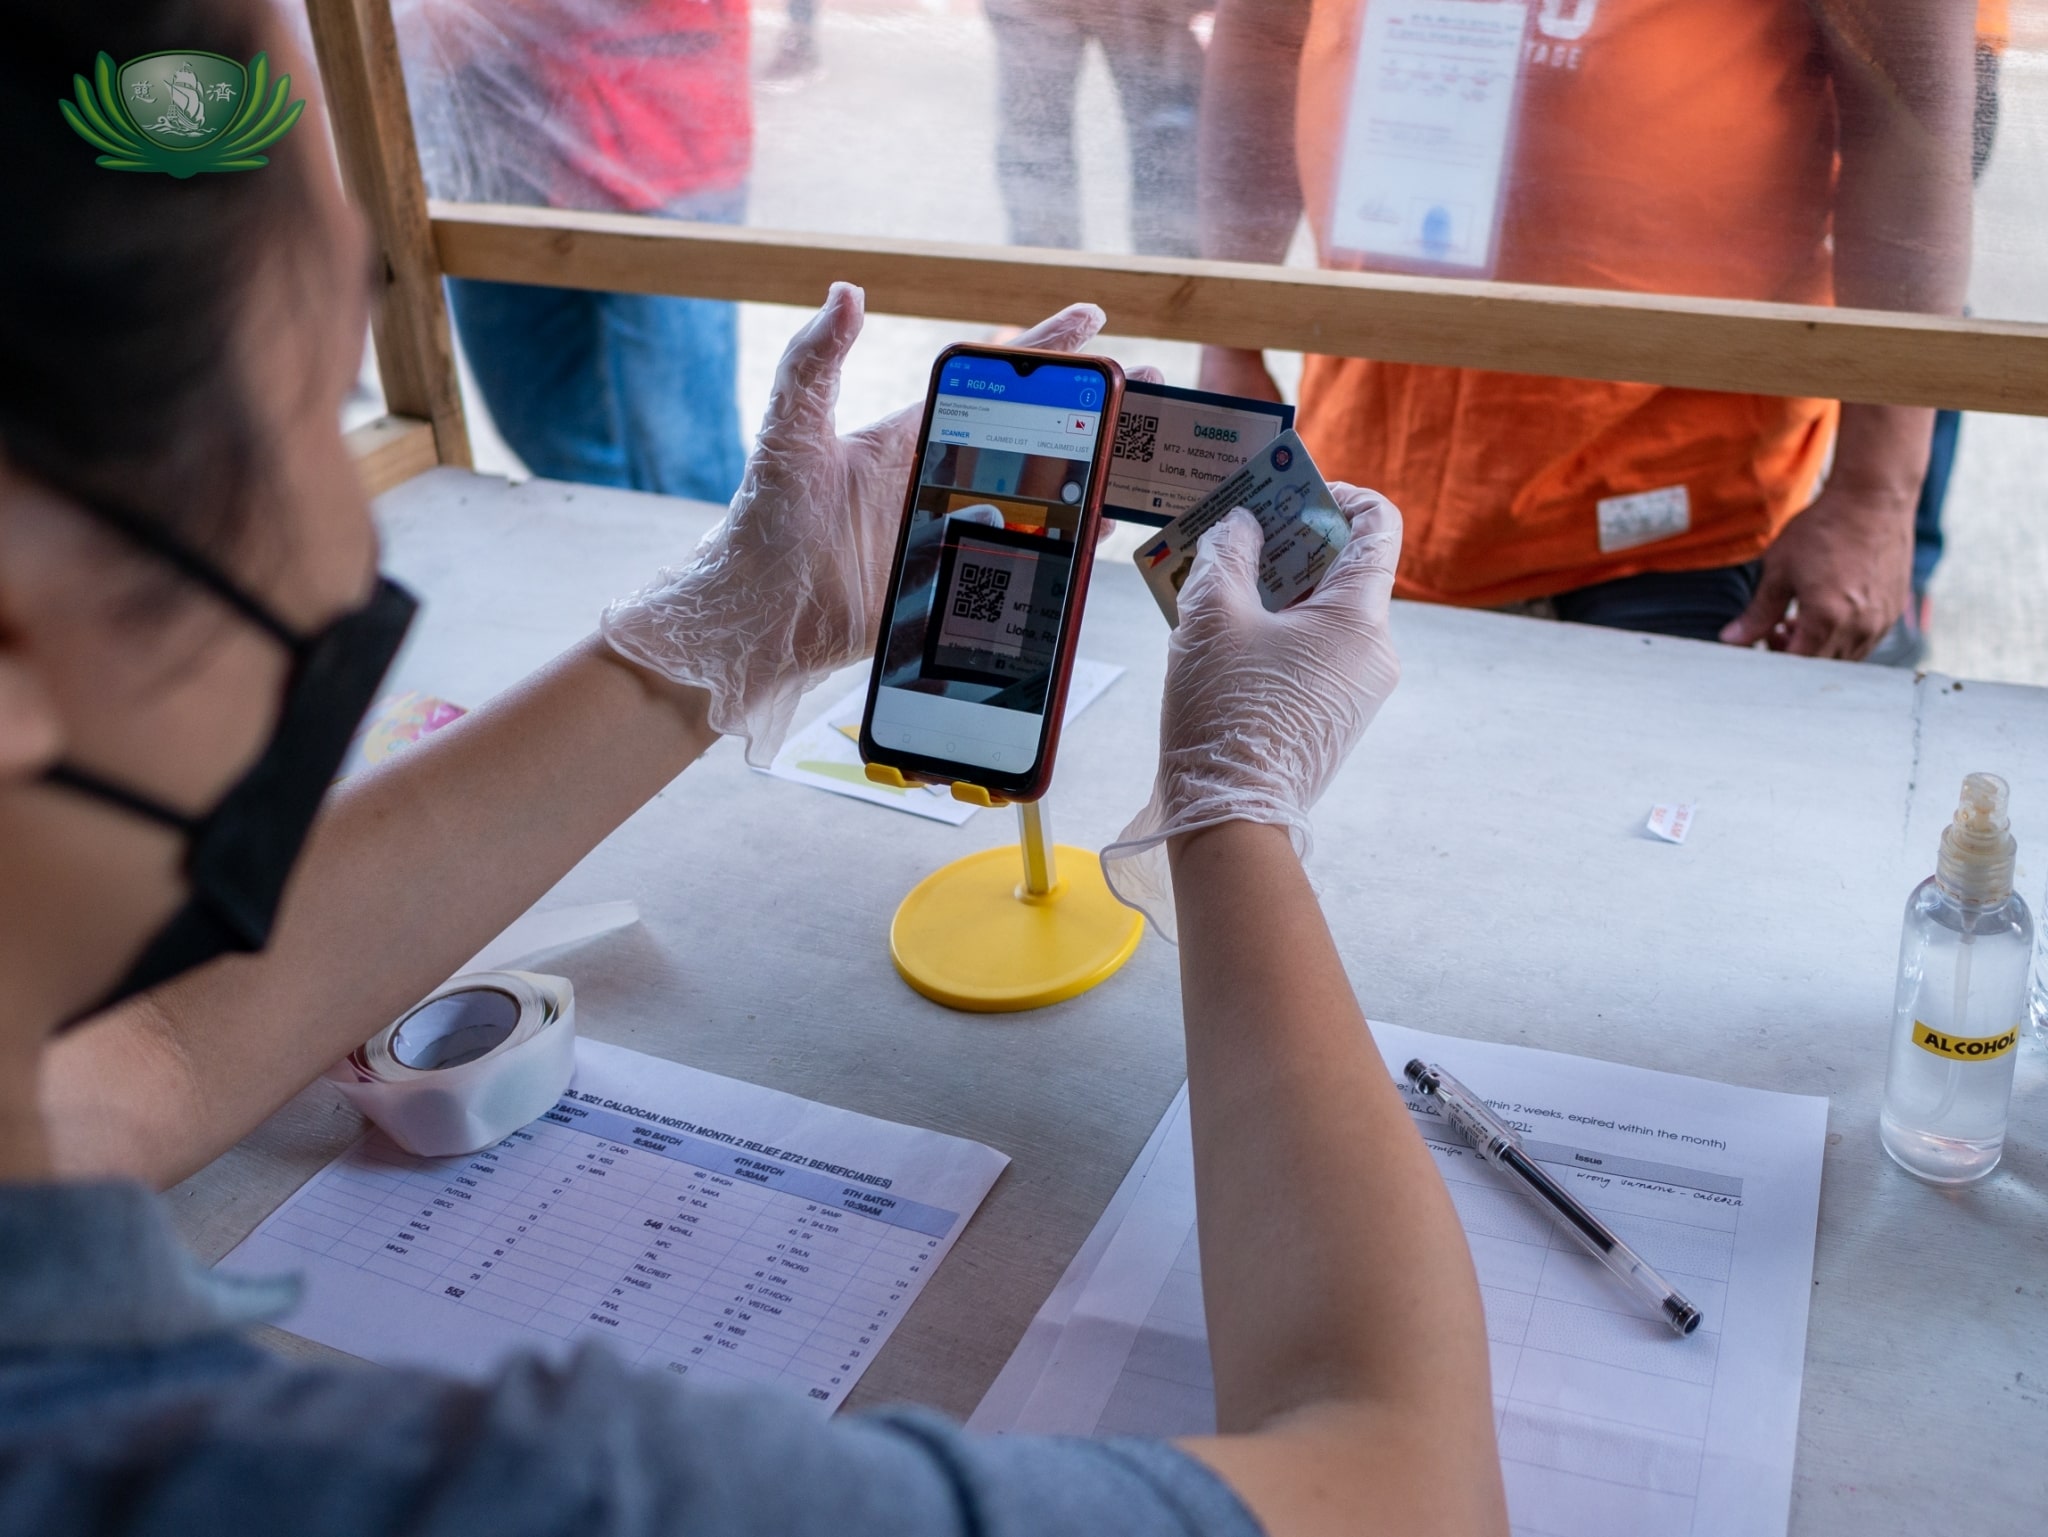 A volunteer uses an app on her cellphone to confirm a driver’s identification. This has made the process of claiming relief goods faster and more efficient. 【Photo by Daniel Lazar】